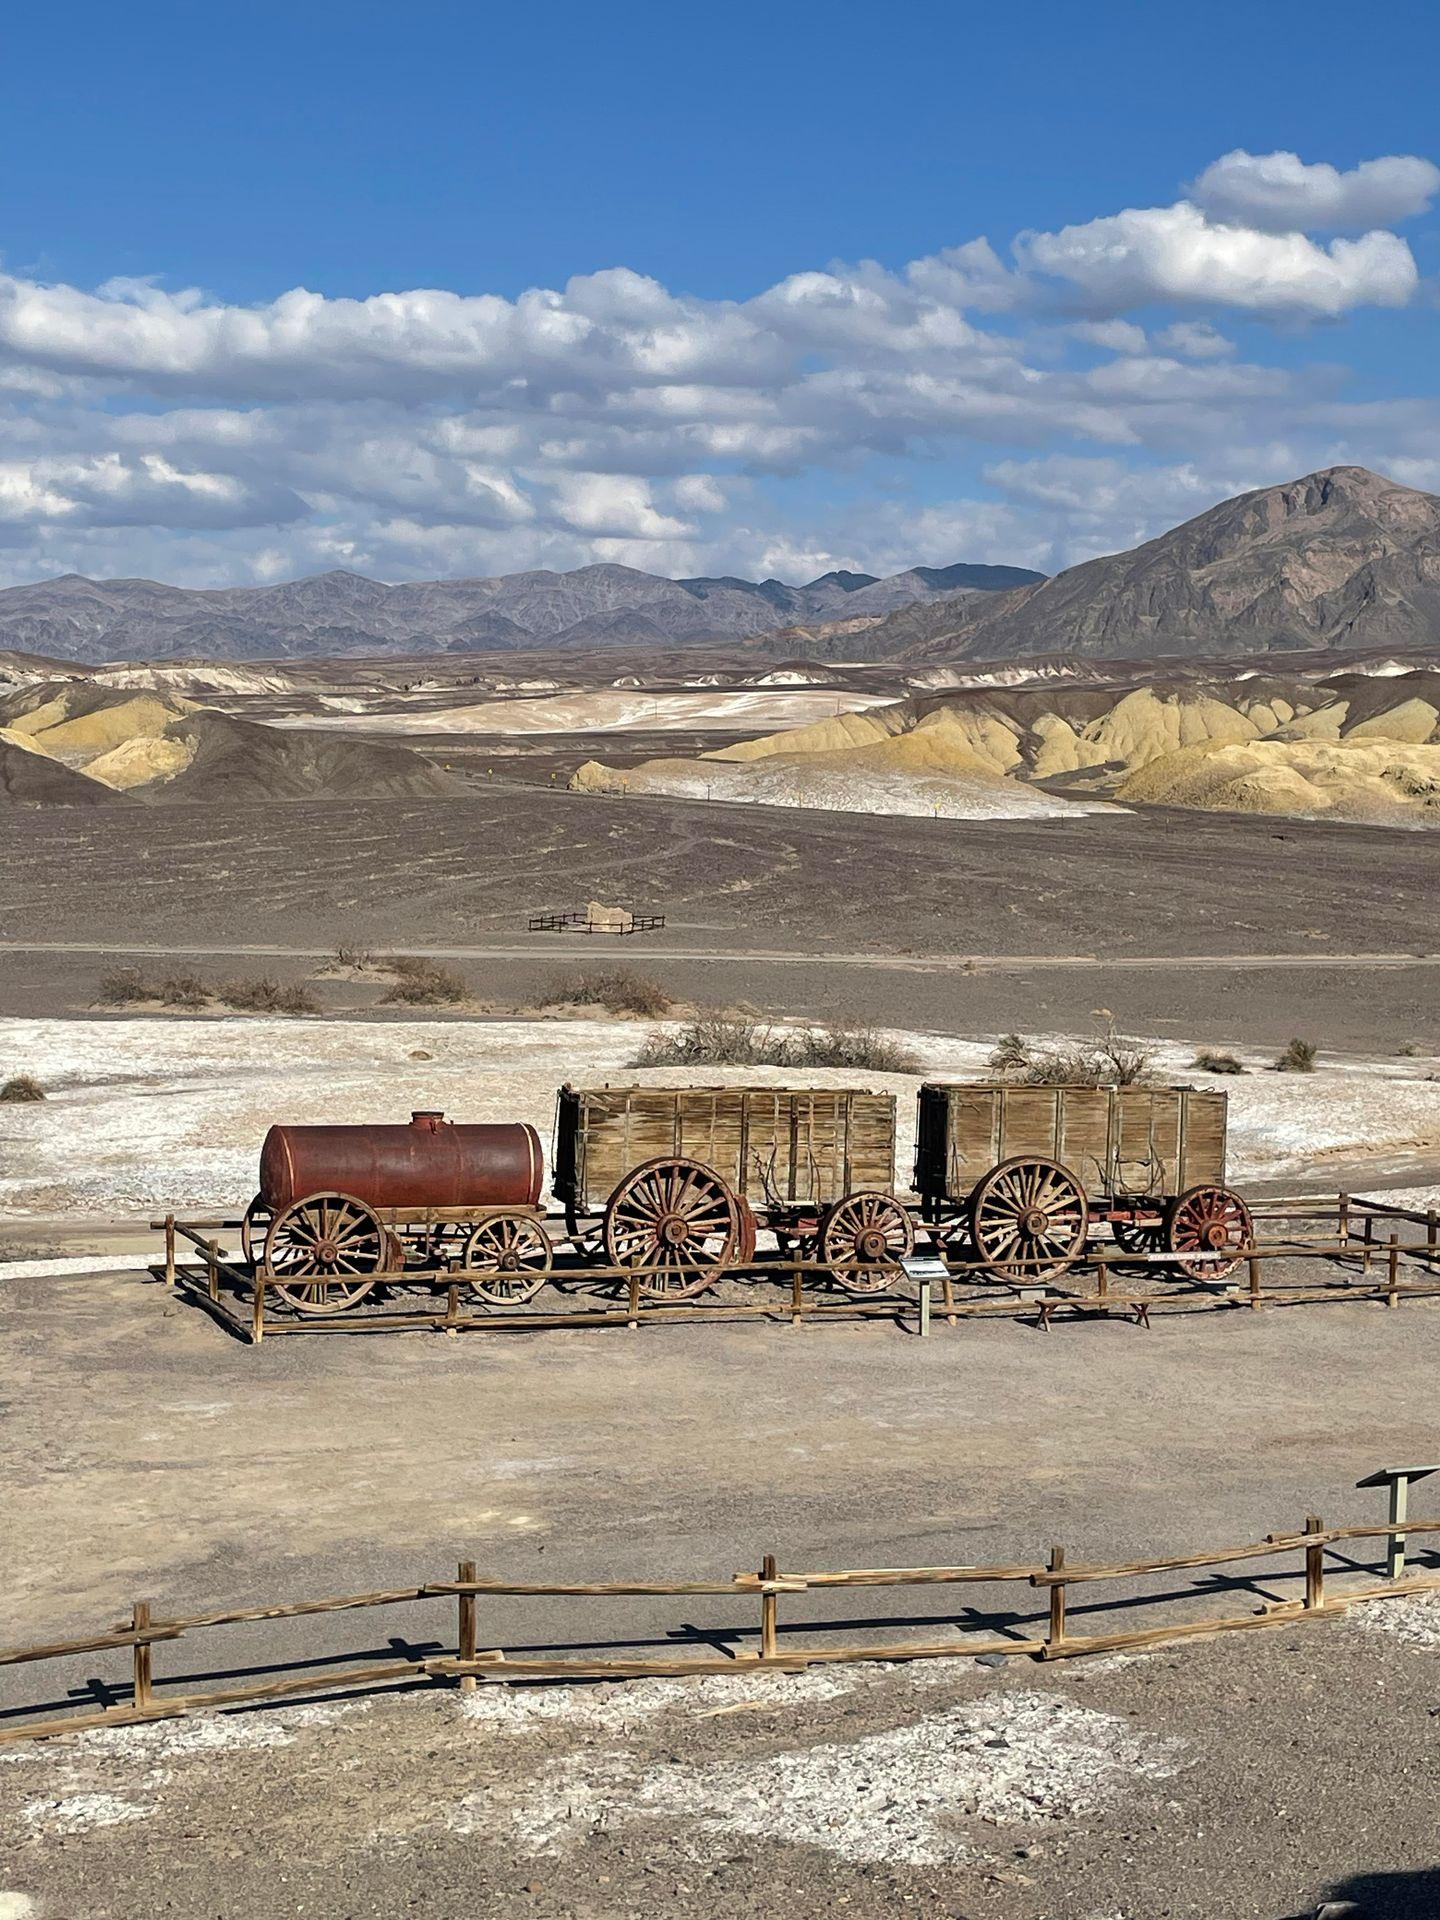 A tank and other items that were used to transport items related to Borax mining in Death Valley.